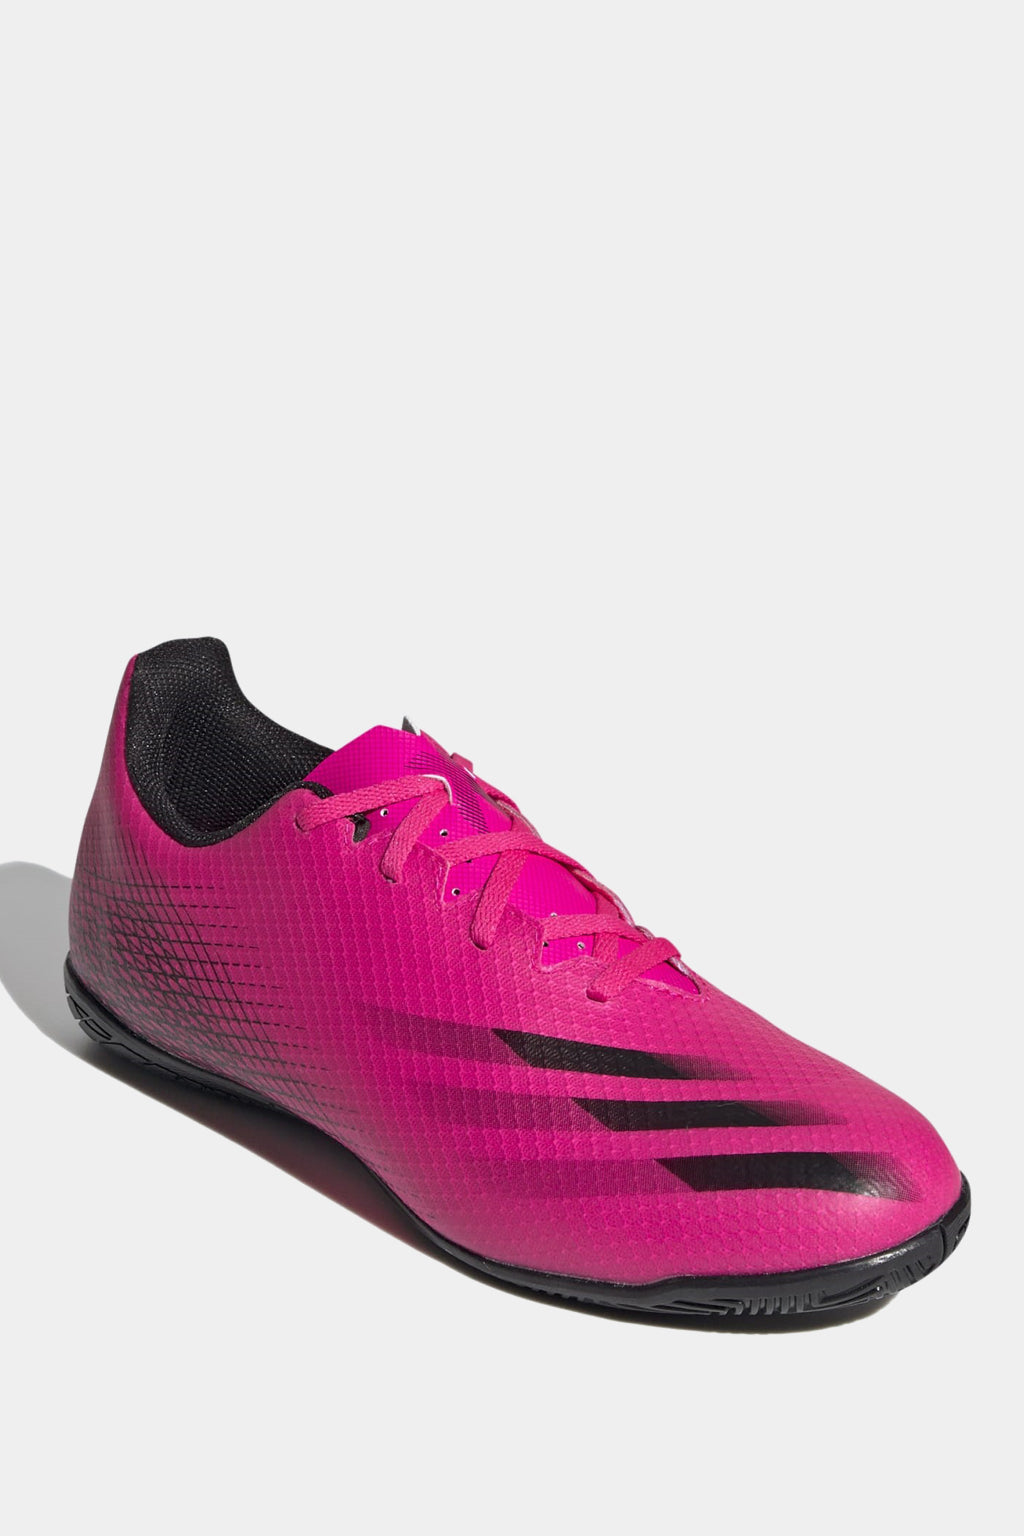 Adidas - X Ghosted.4 Indoor Boots